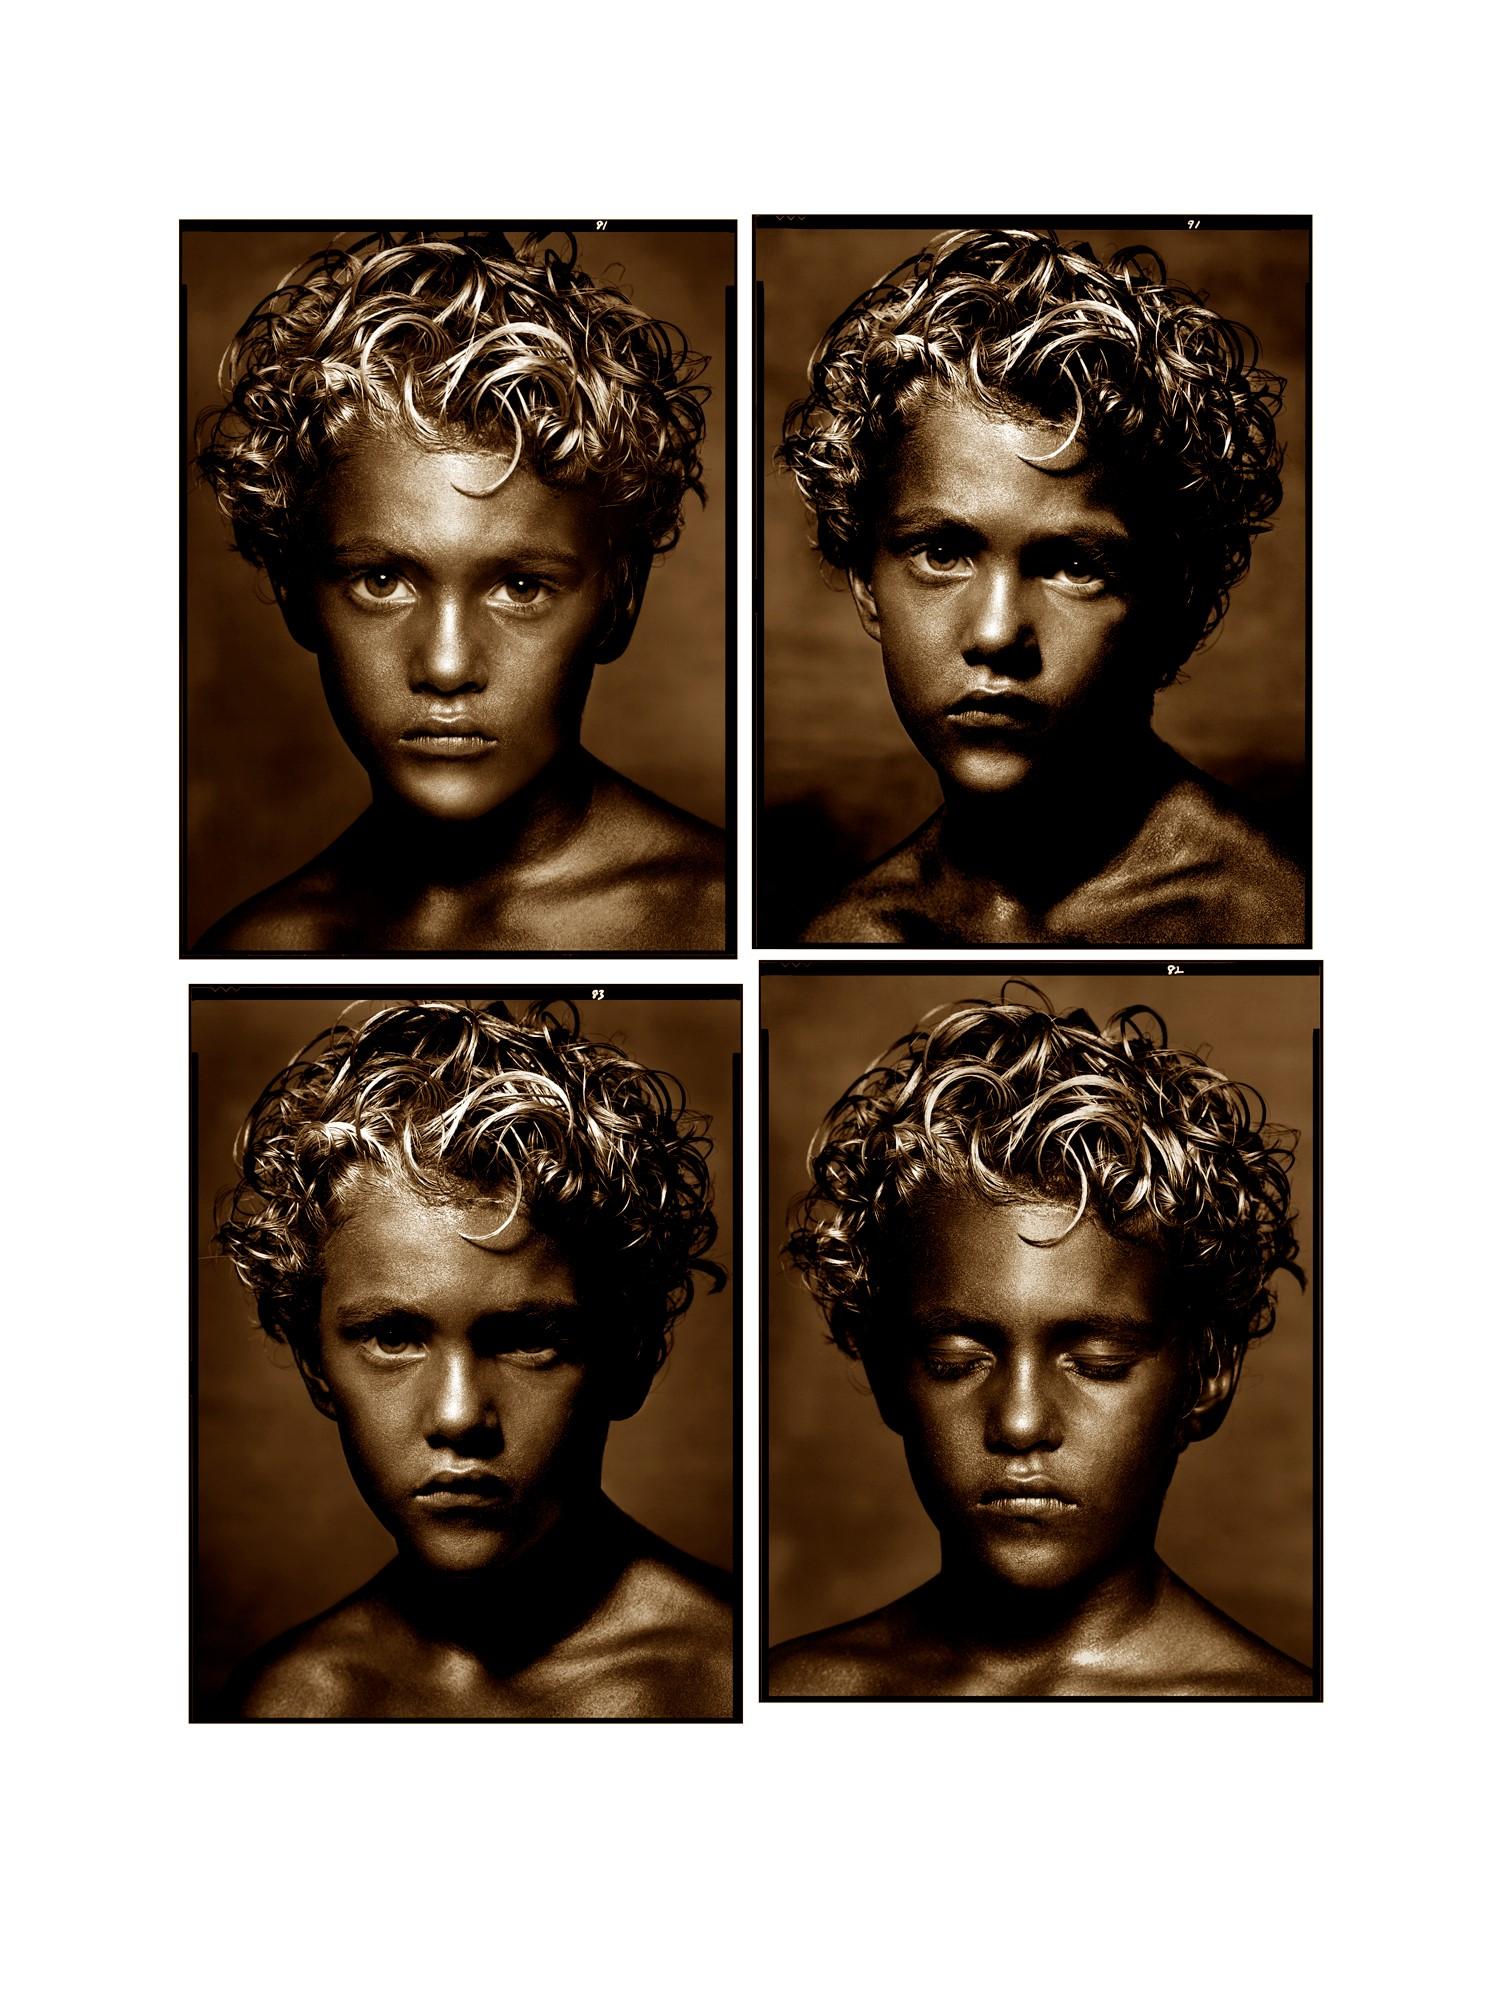 Albert Watson Color Photograph - Golden Boys by Watson - four versions of the portrait by the boy in gold paint